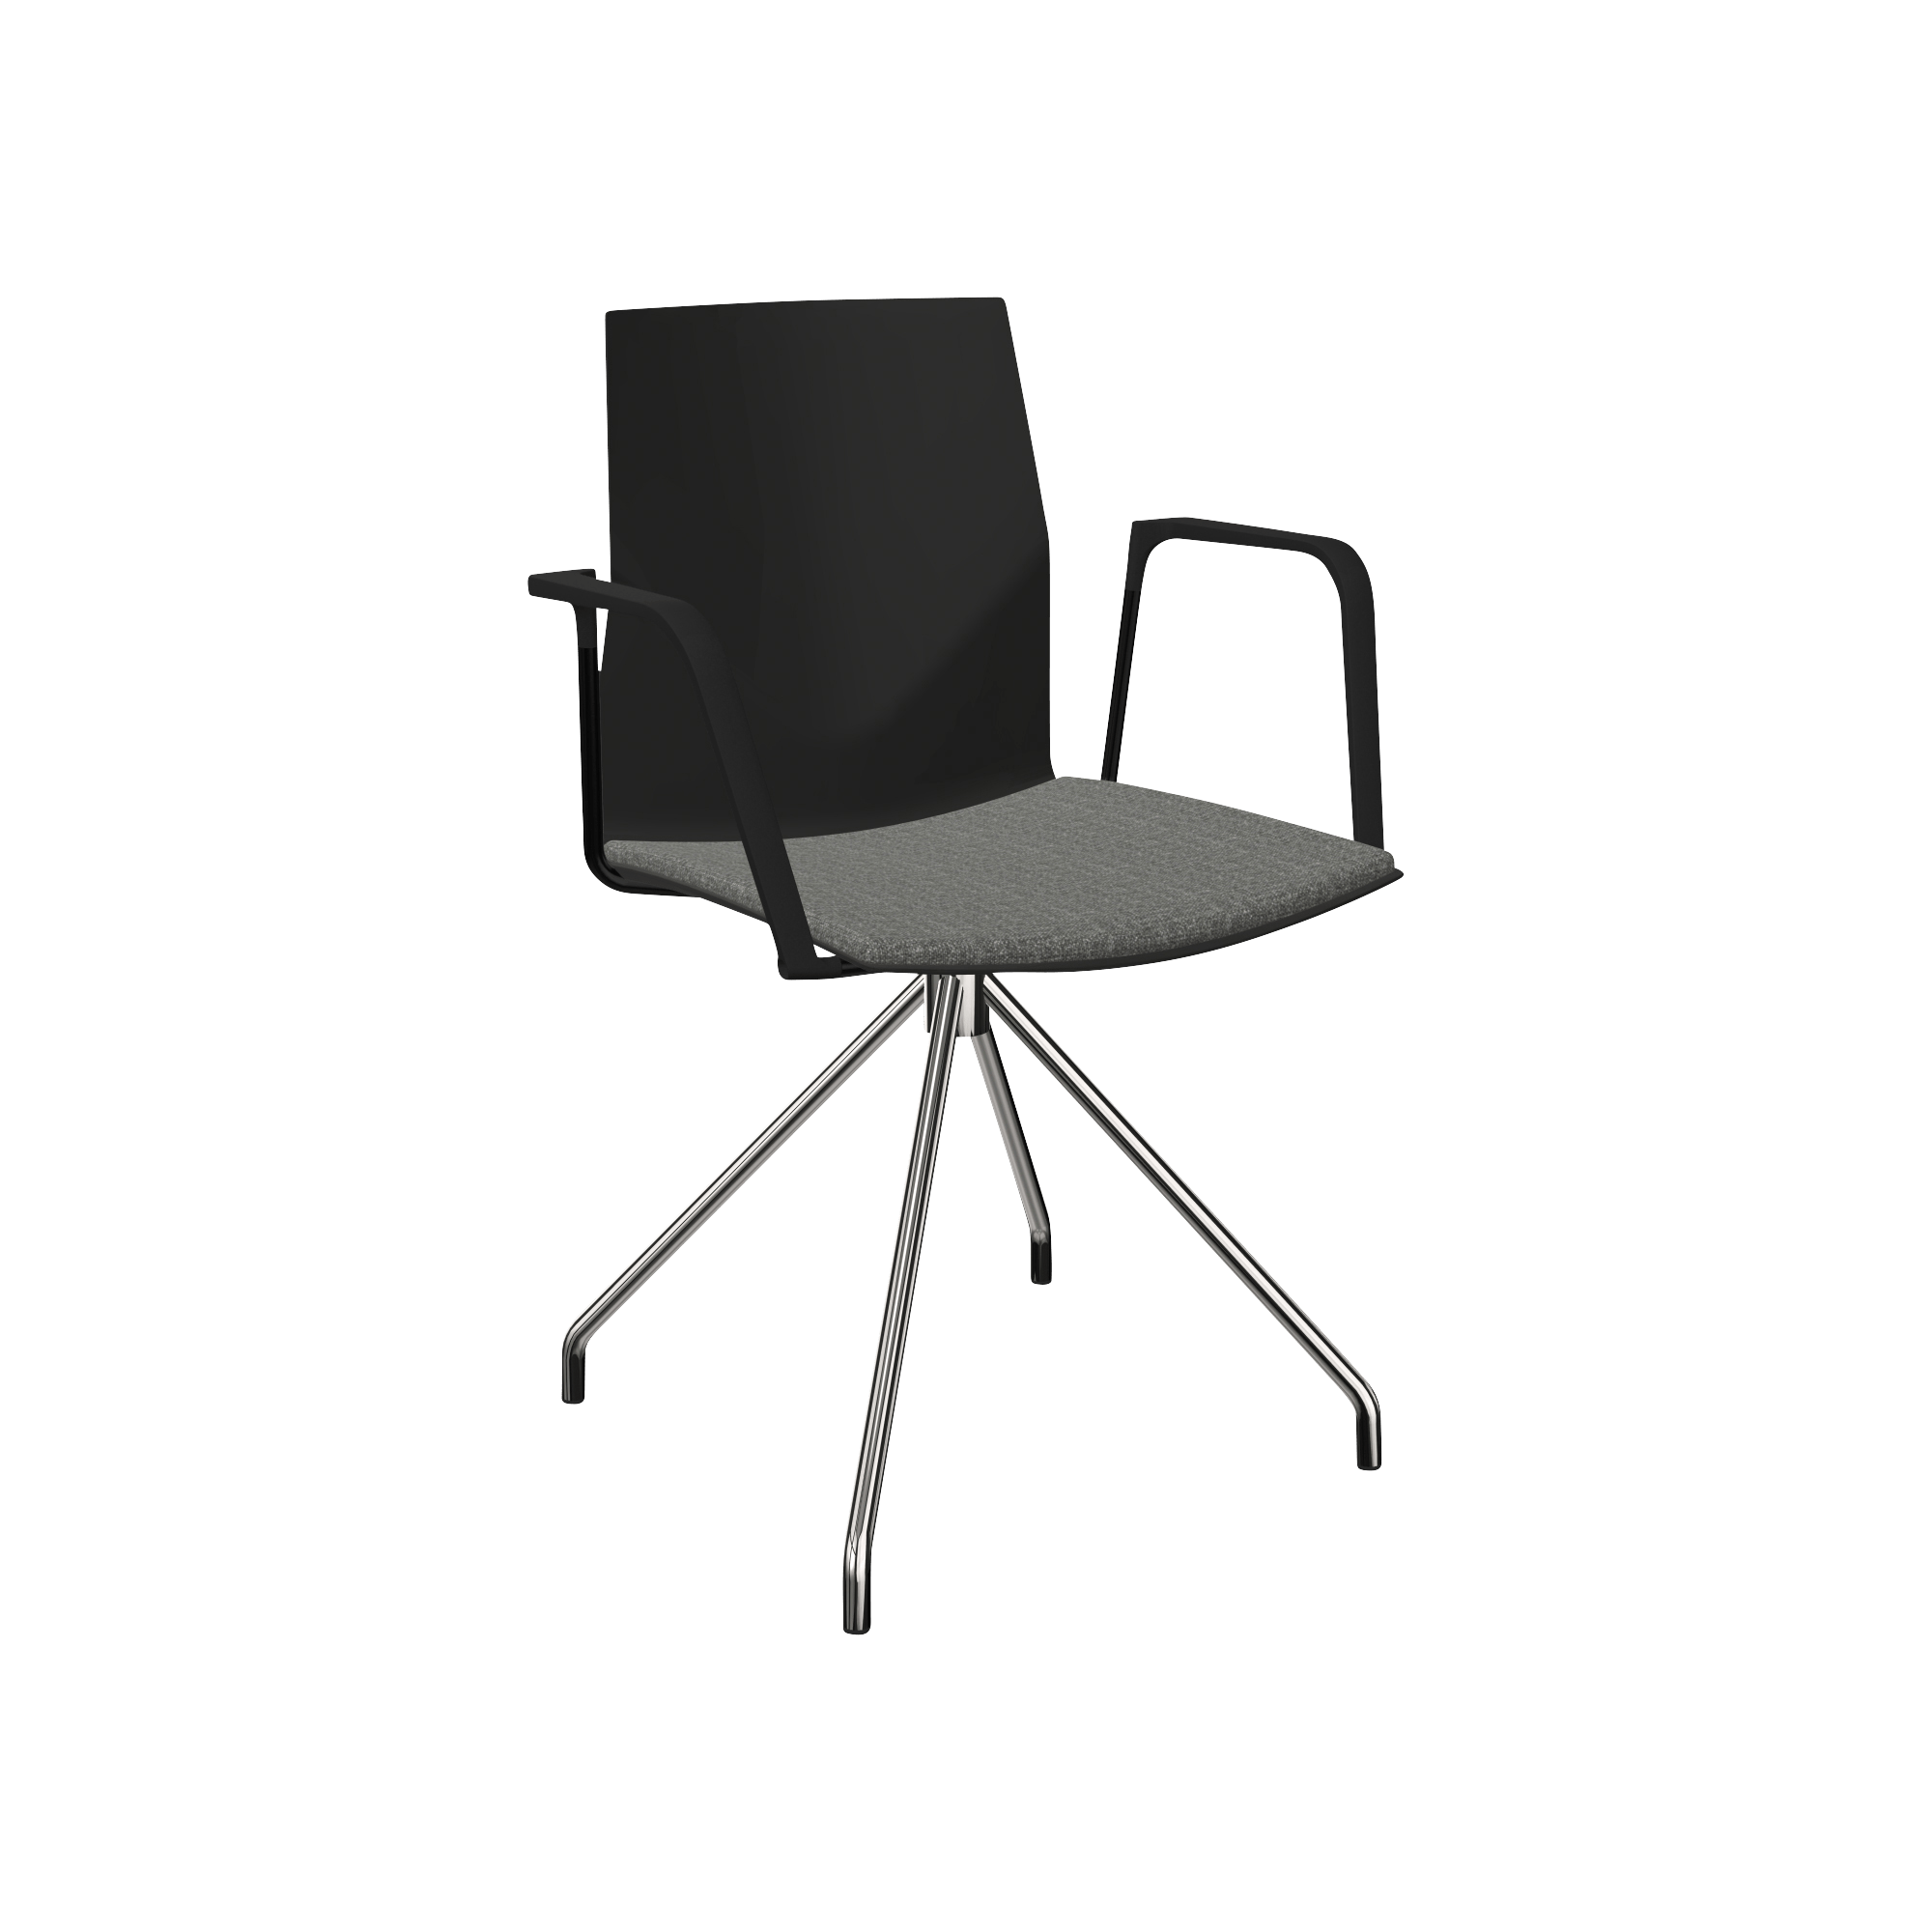 A black chair with metal legs.